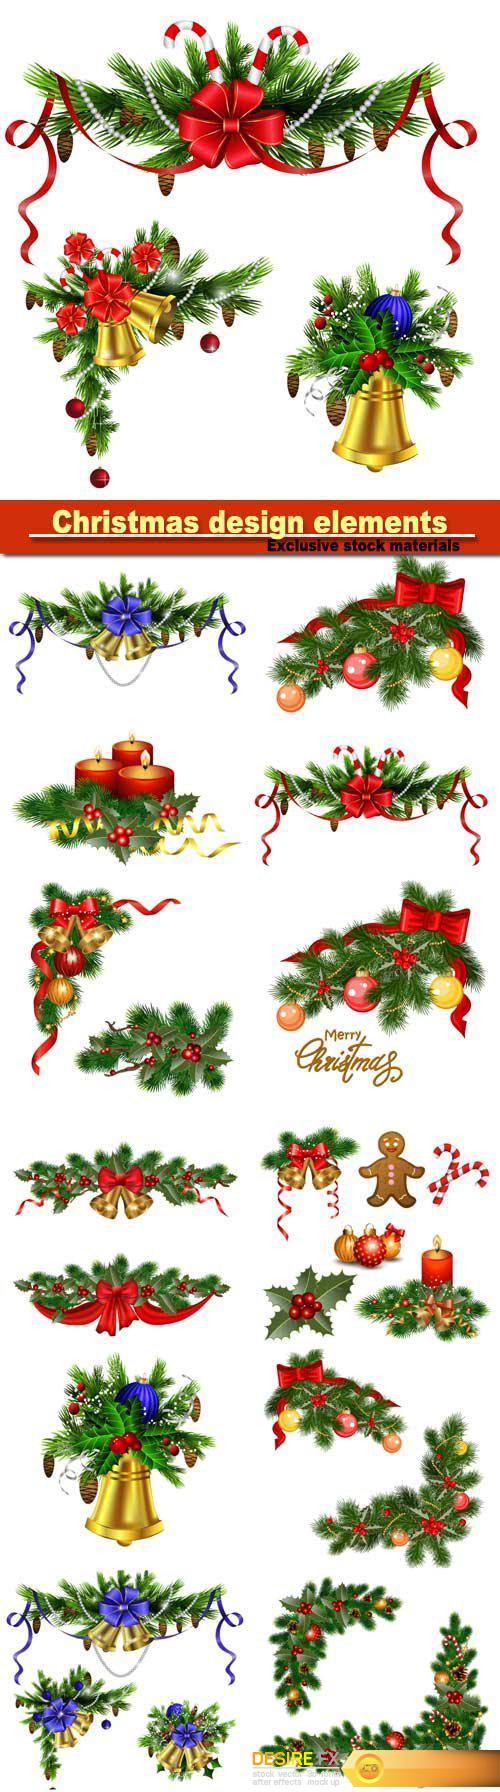 Christmas design elements, background with fir tree, holly and decorative elements